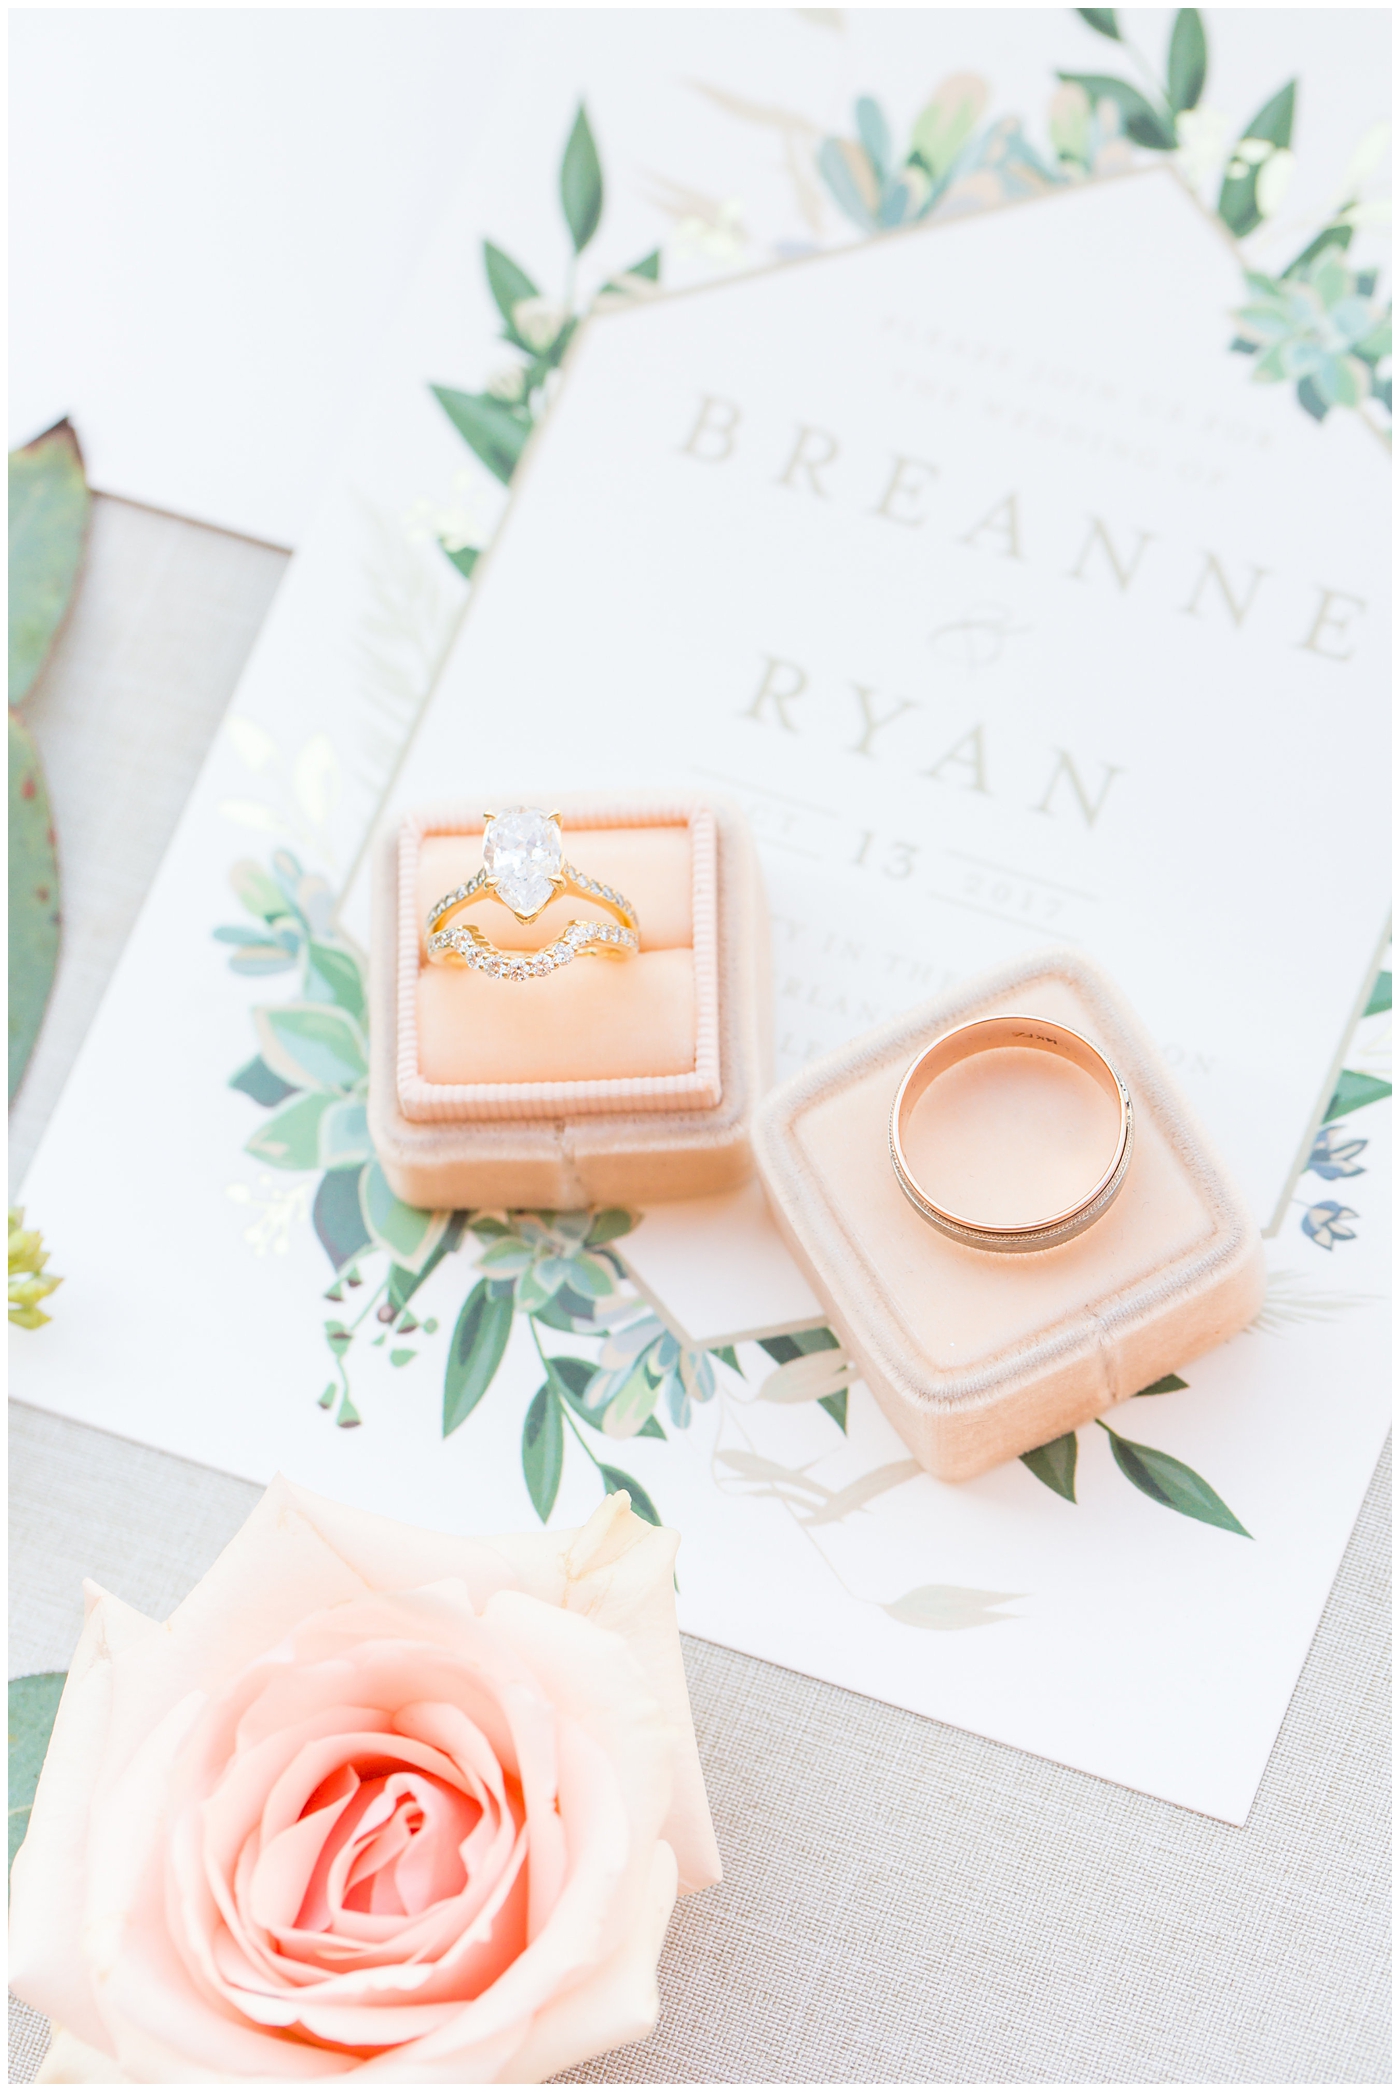 Wedding rings in pink mrs. box on top of elegant wedding invite with green succulents